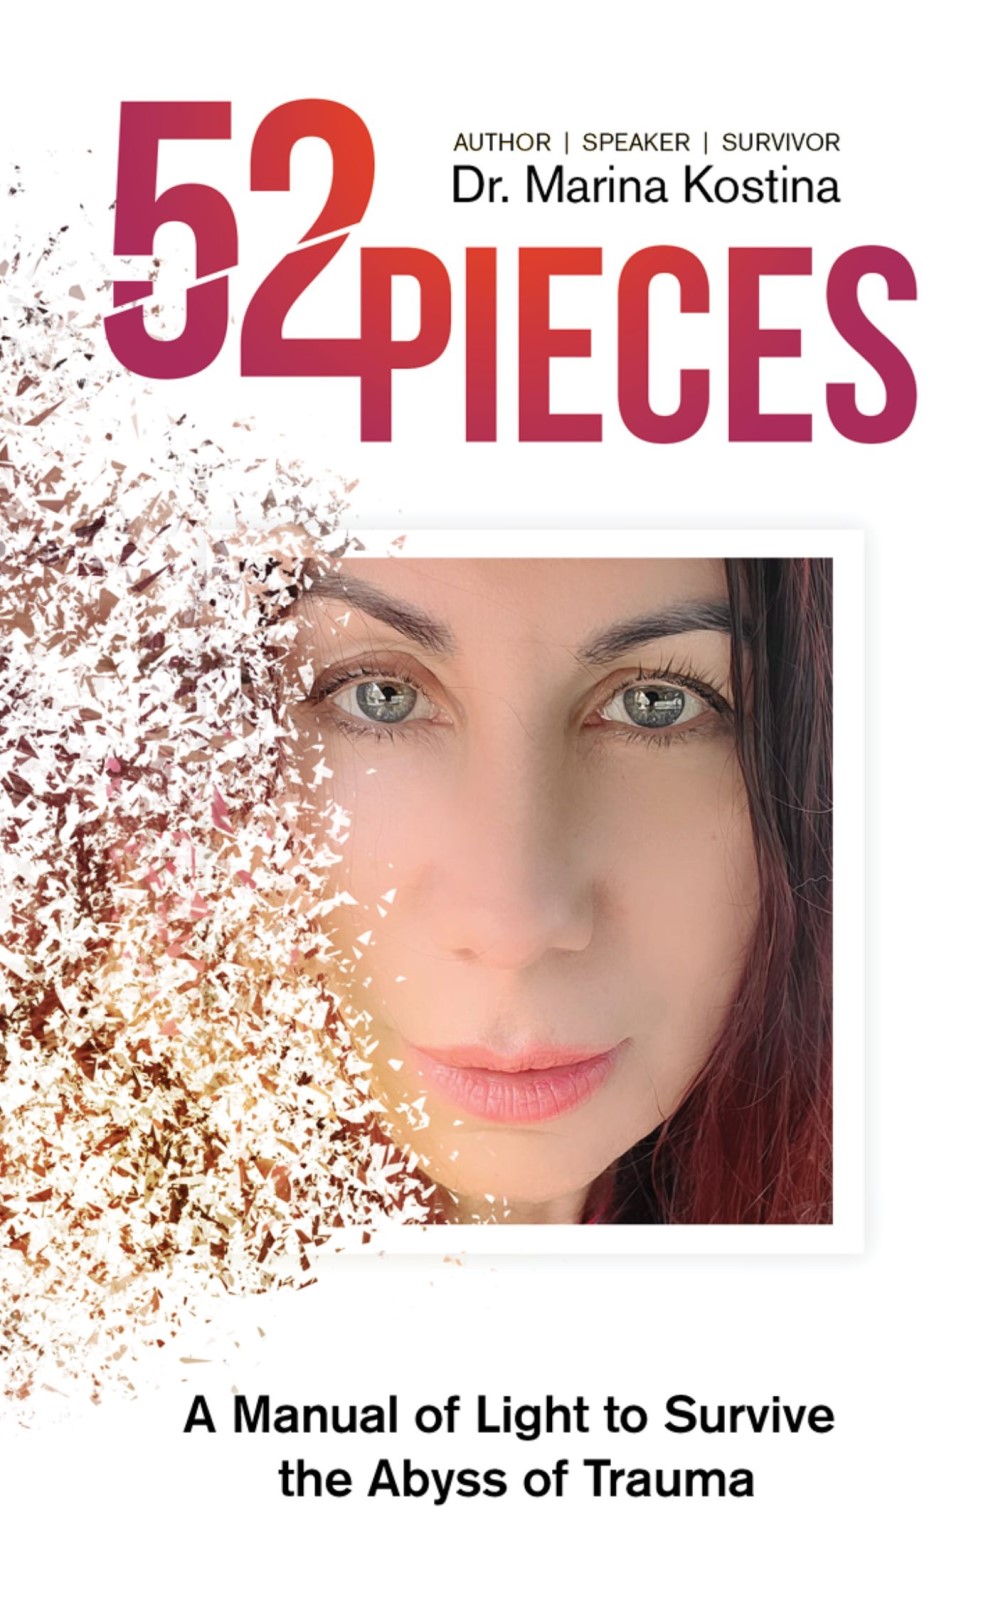 The front cover of 52 Pieces by Dr. Marina Kostina